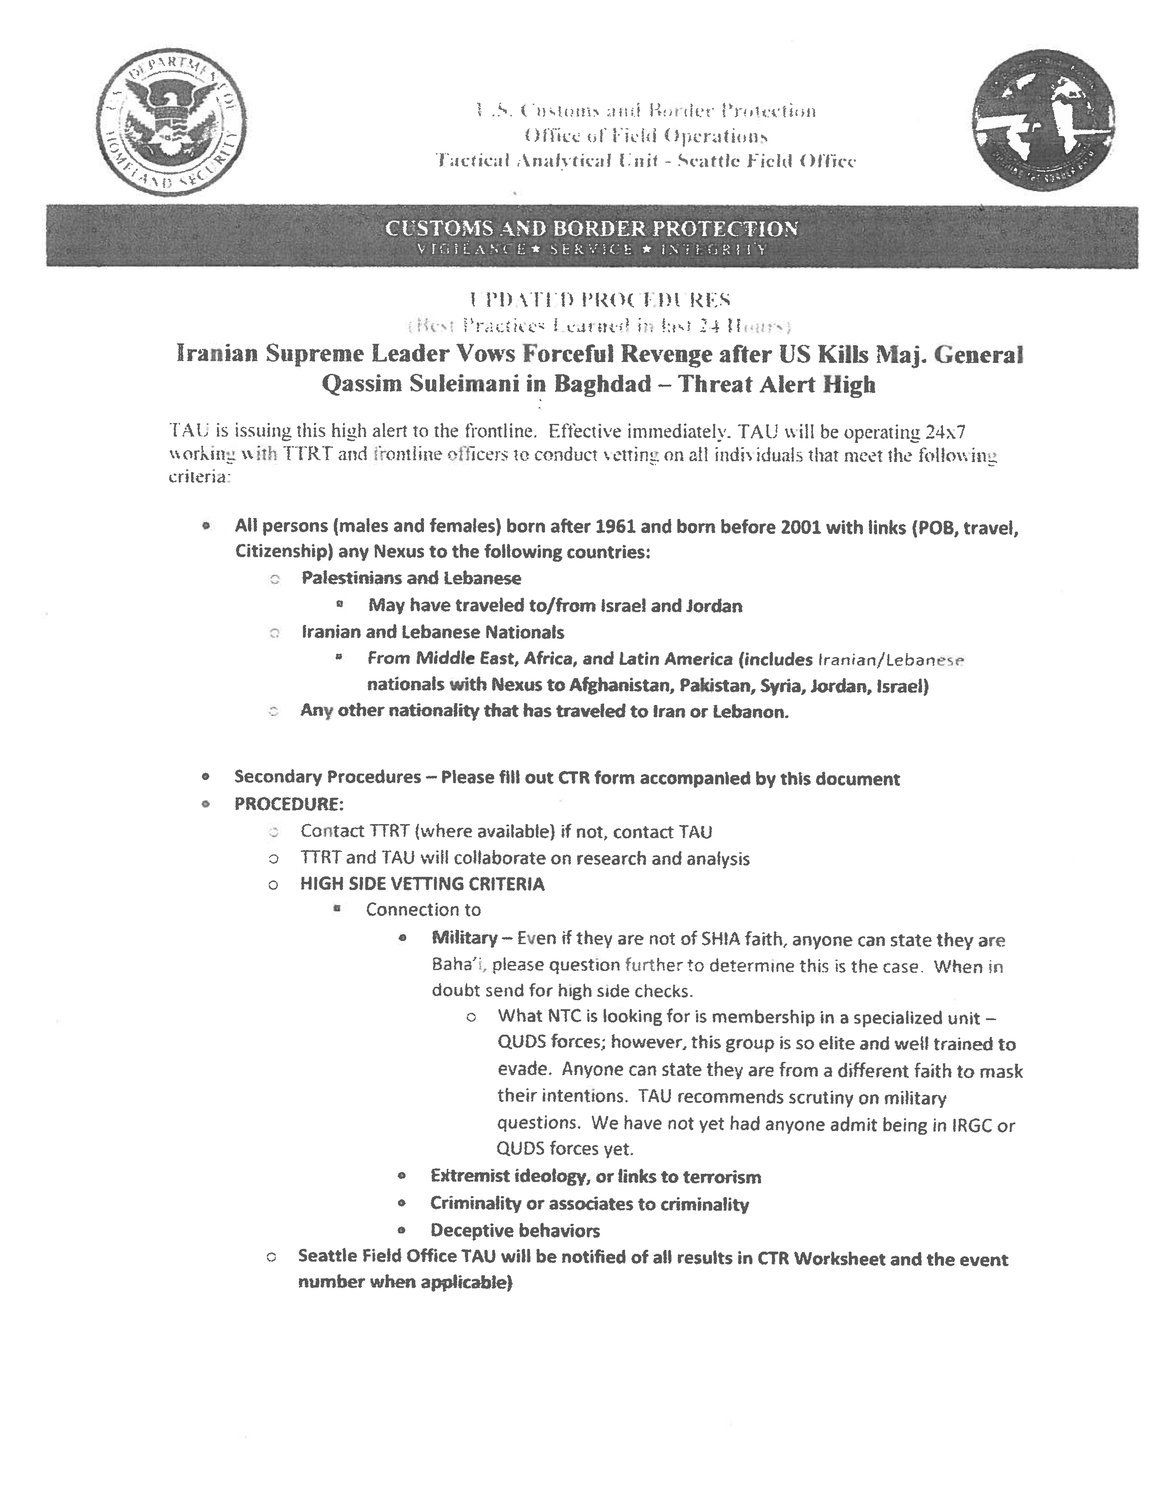 The CBP bulletin that instructed U.S. border agents to detain travelers who were born in Iran or met certain other criteria. The full document can be read online at thenorthernlight.com.